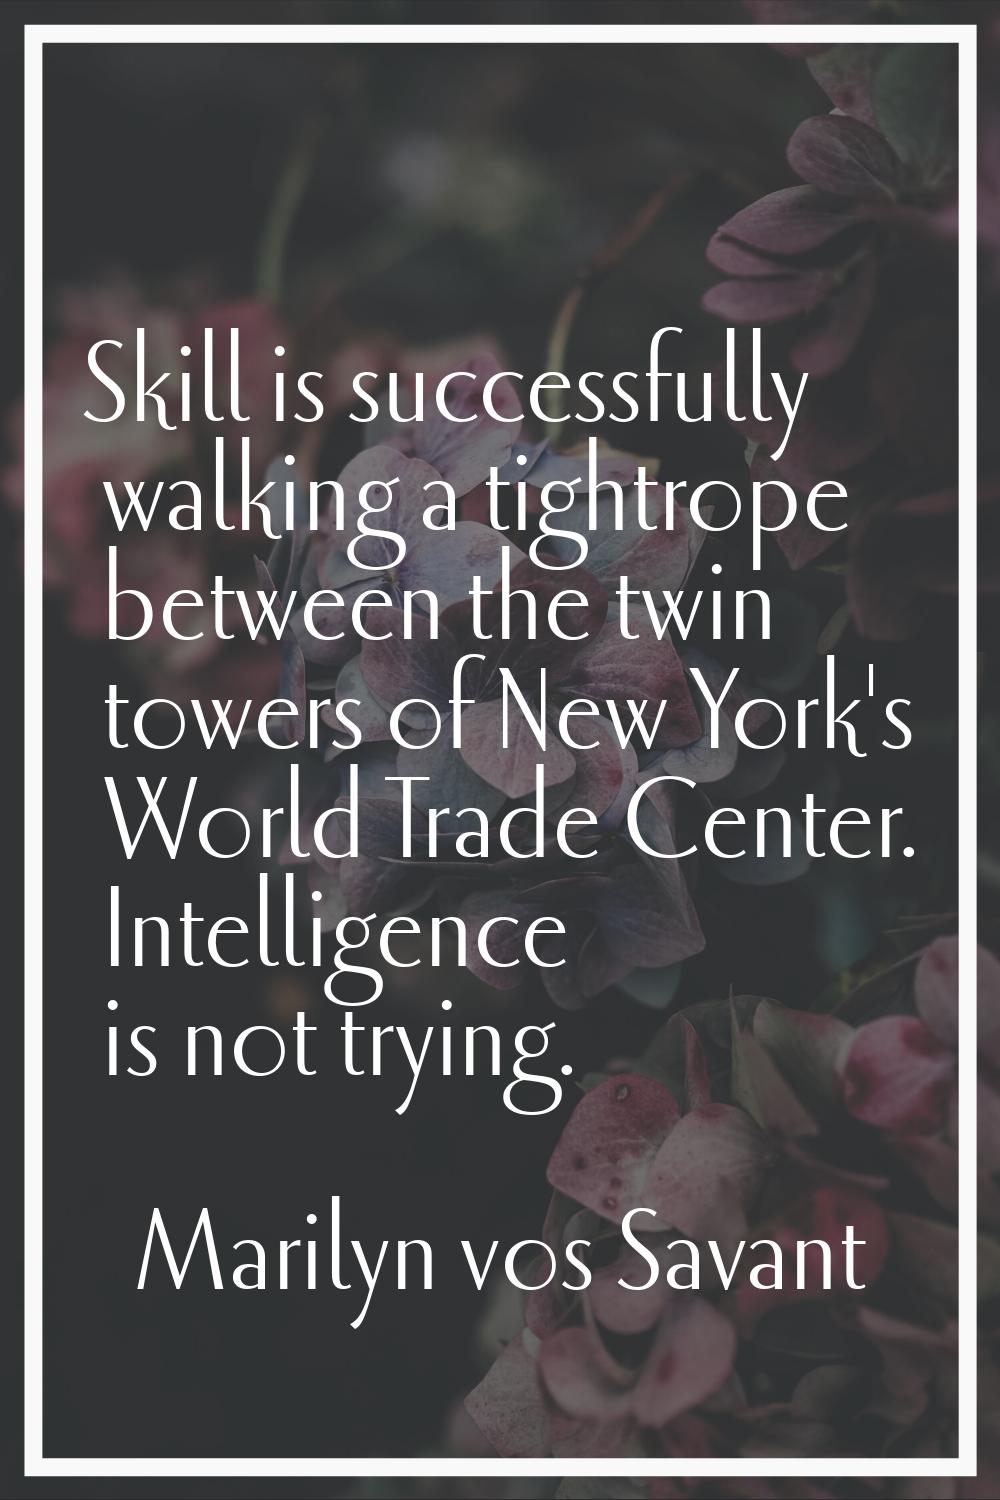 Skill is successfully walking a tightrope between the twin towers of New York's World Trade Center.